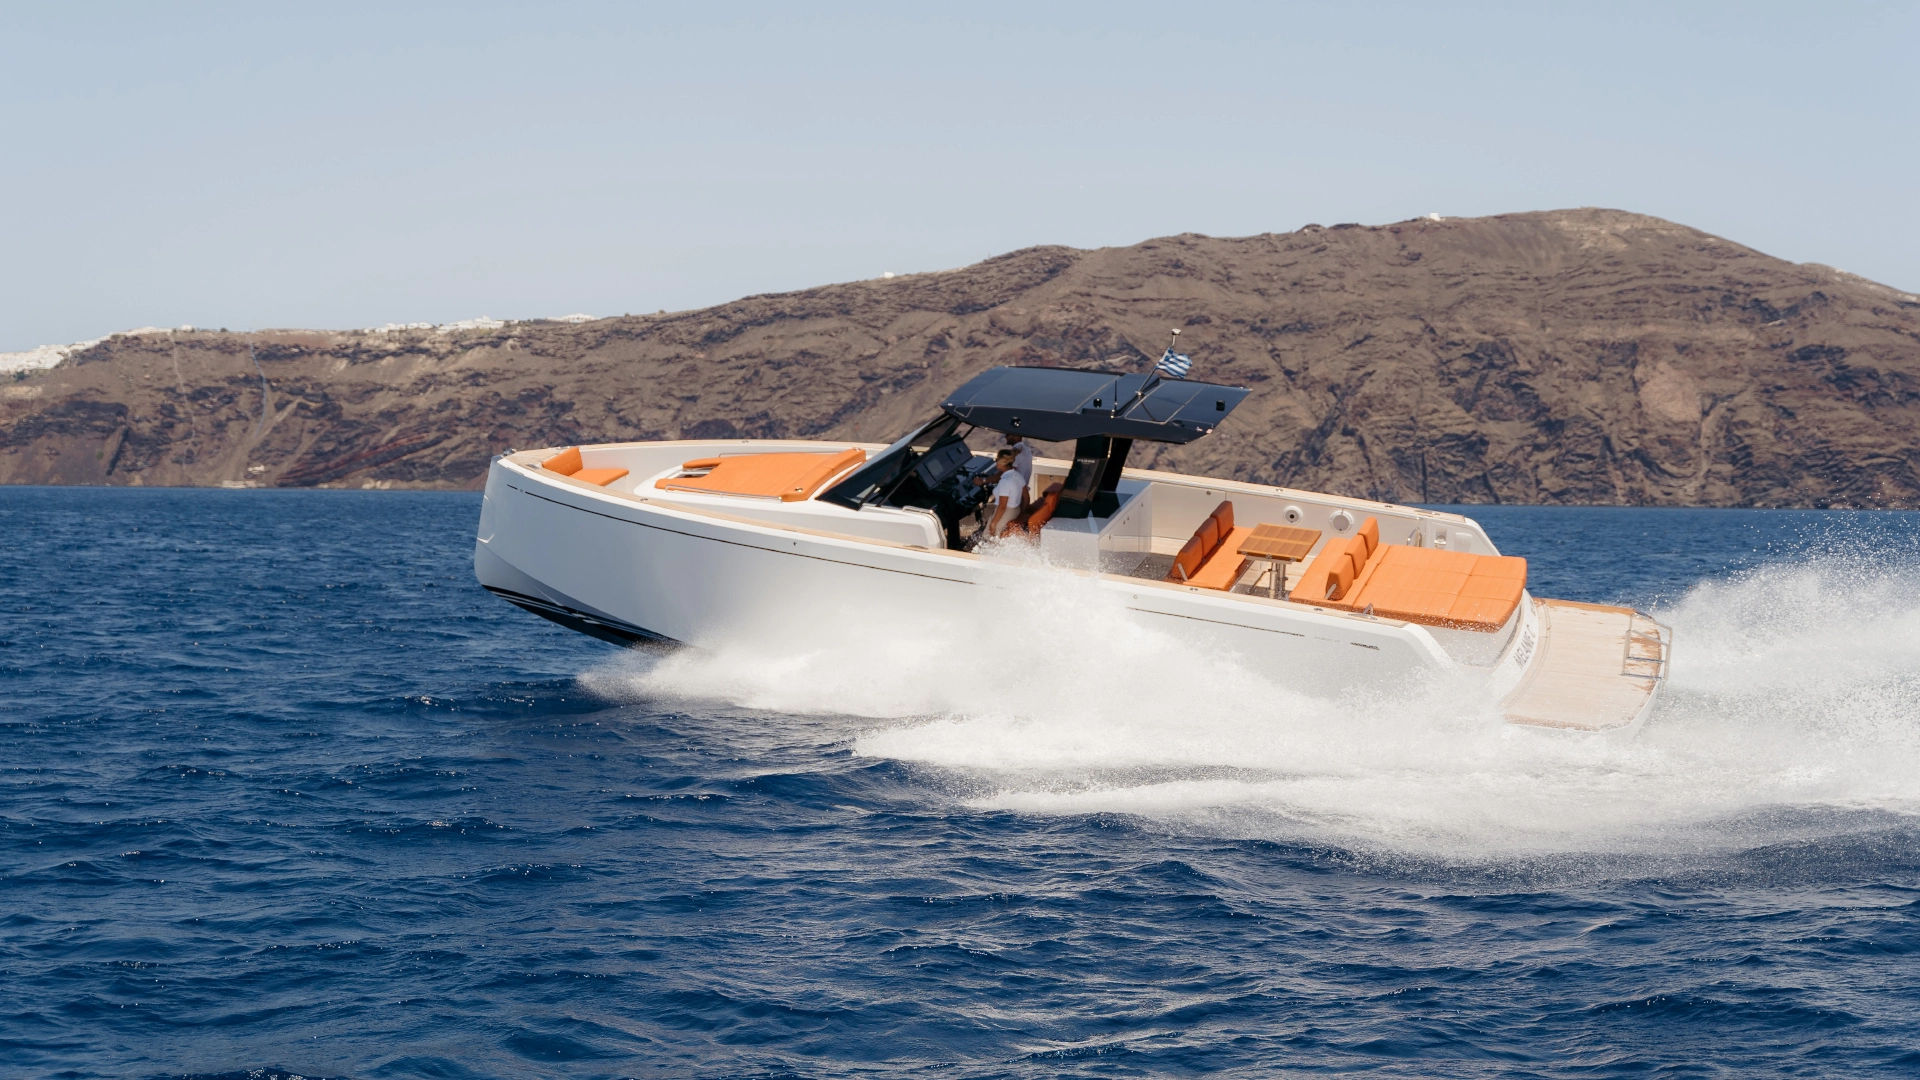 Unforgettable Santorini Morning Cruise on a Luxurious Pardo 43 Yacht Golden Yachting and Sailing